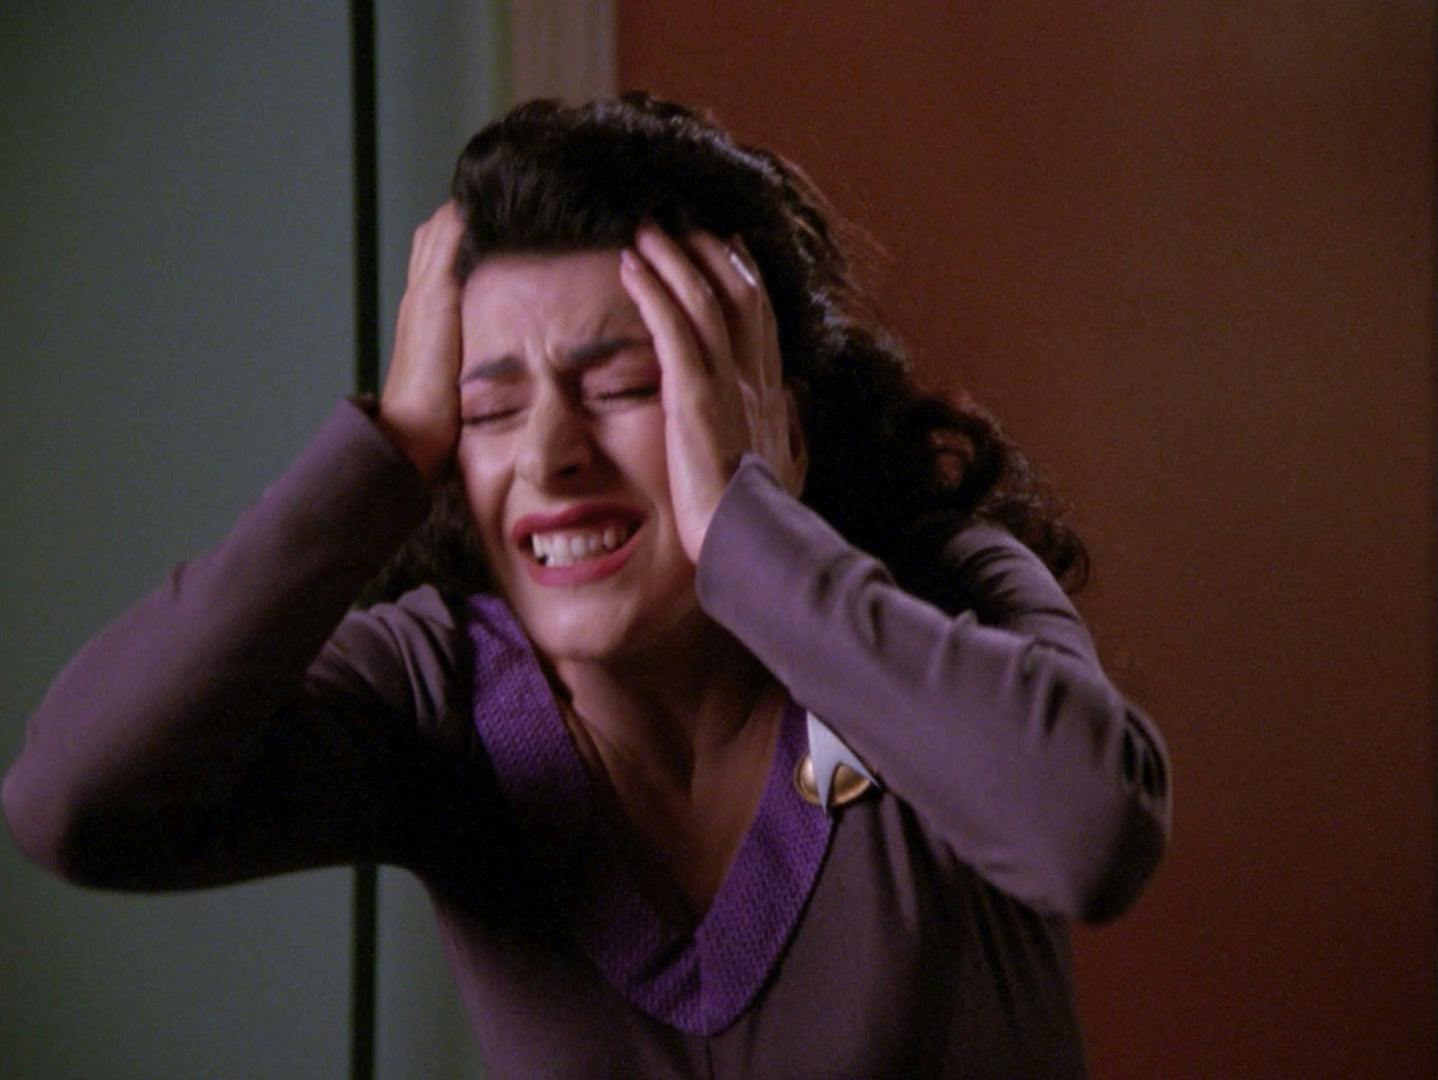 Deanna Troi reacts in pain and agony at the loss of her abilities